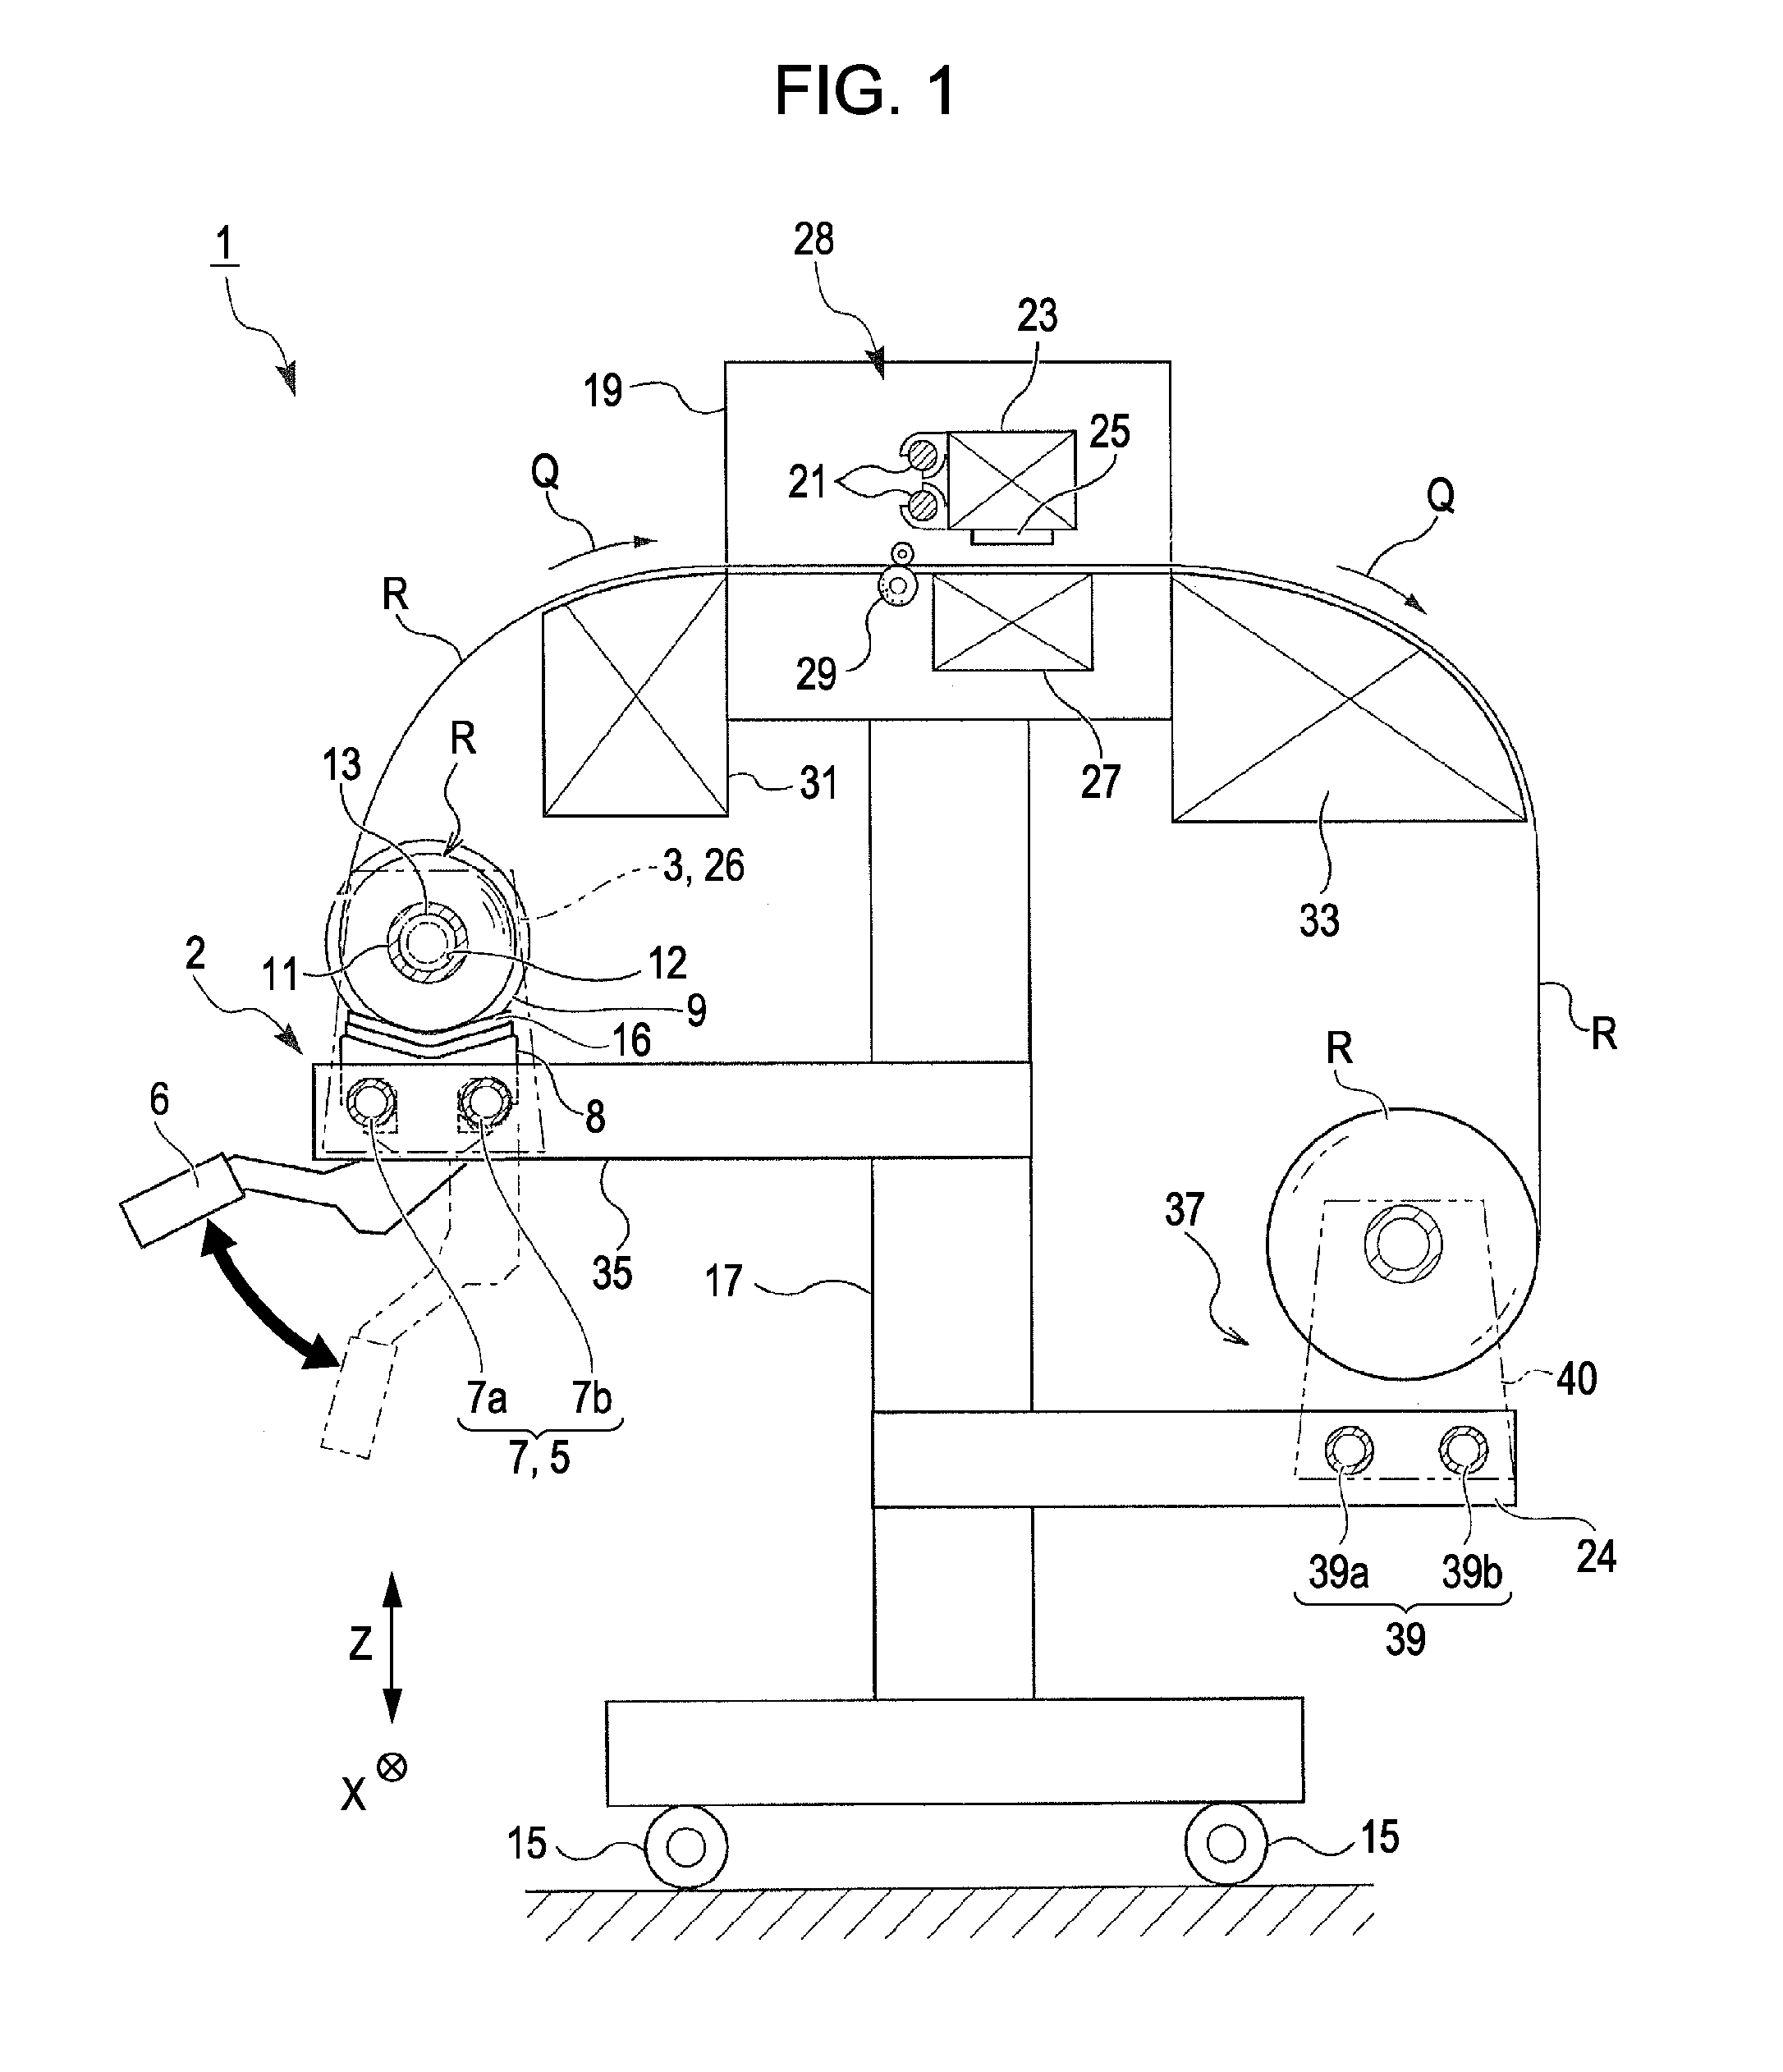 Rolled medium holder device and recording apparatus